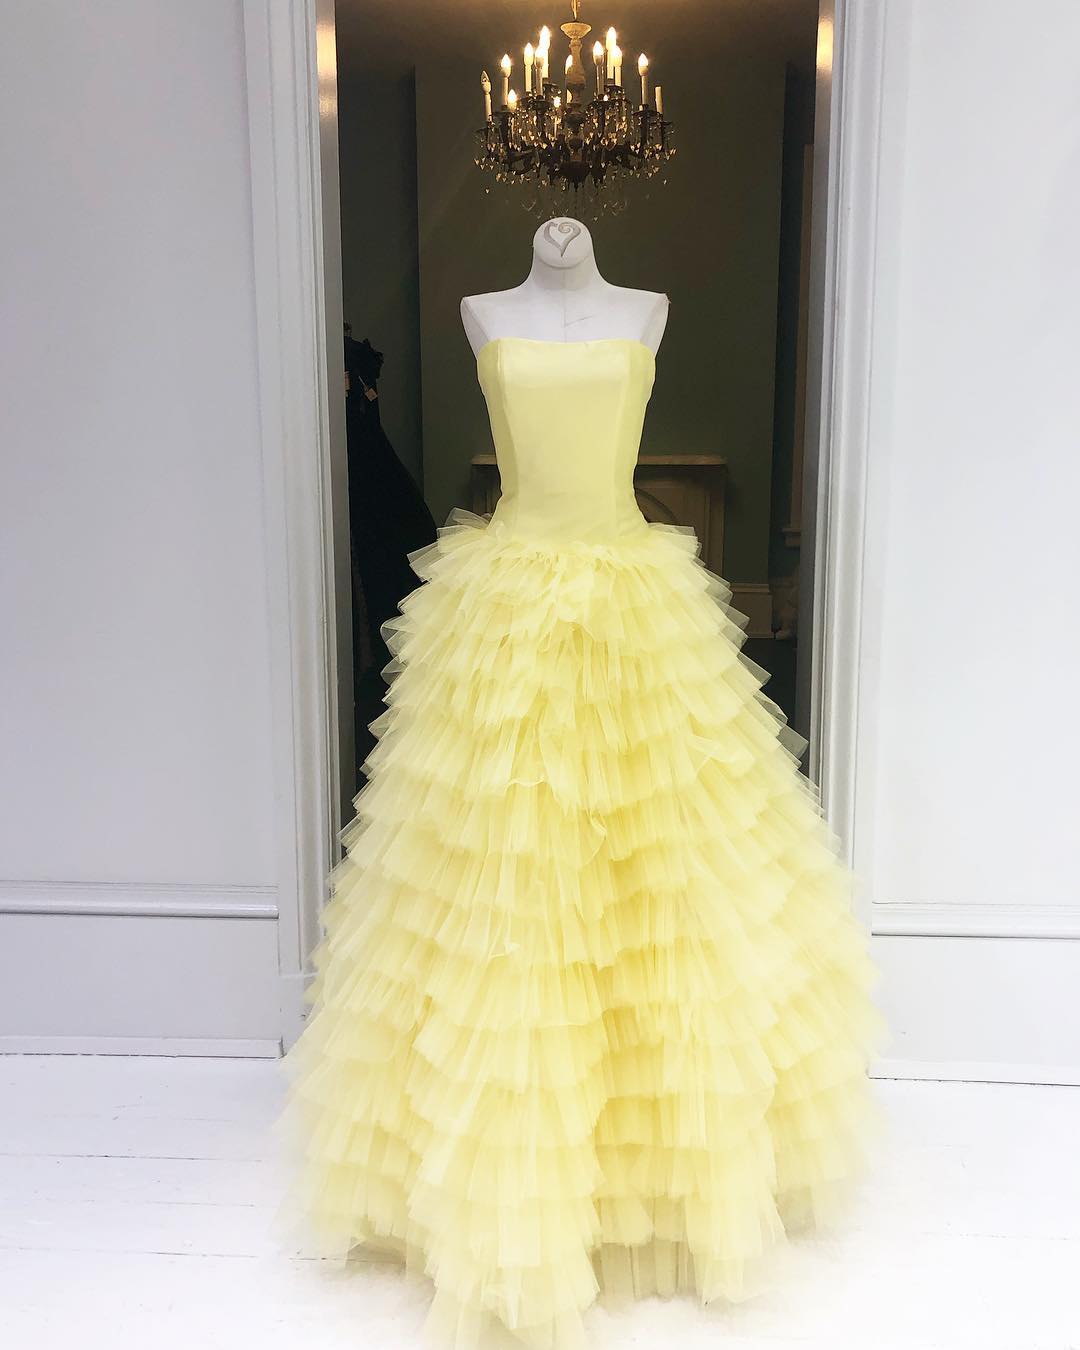 Elegant Strapless Floor Length Yellow Prom Dresses Ball Gown Quinceanera Dresses